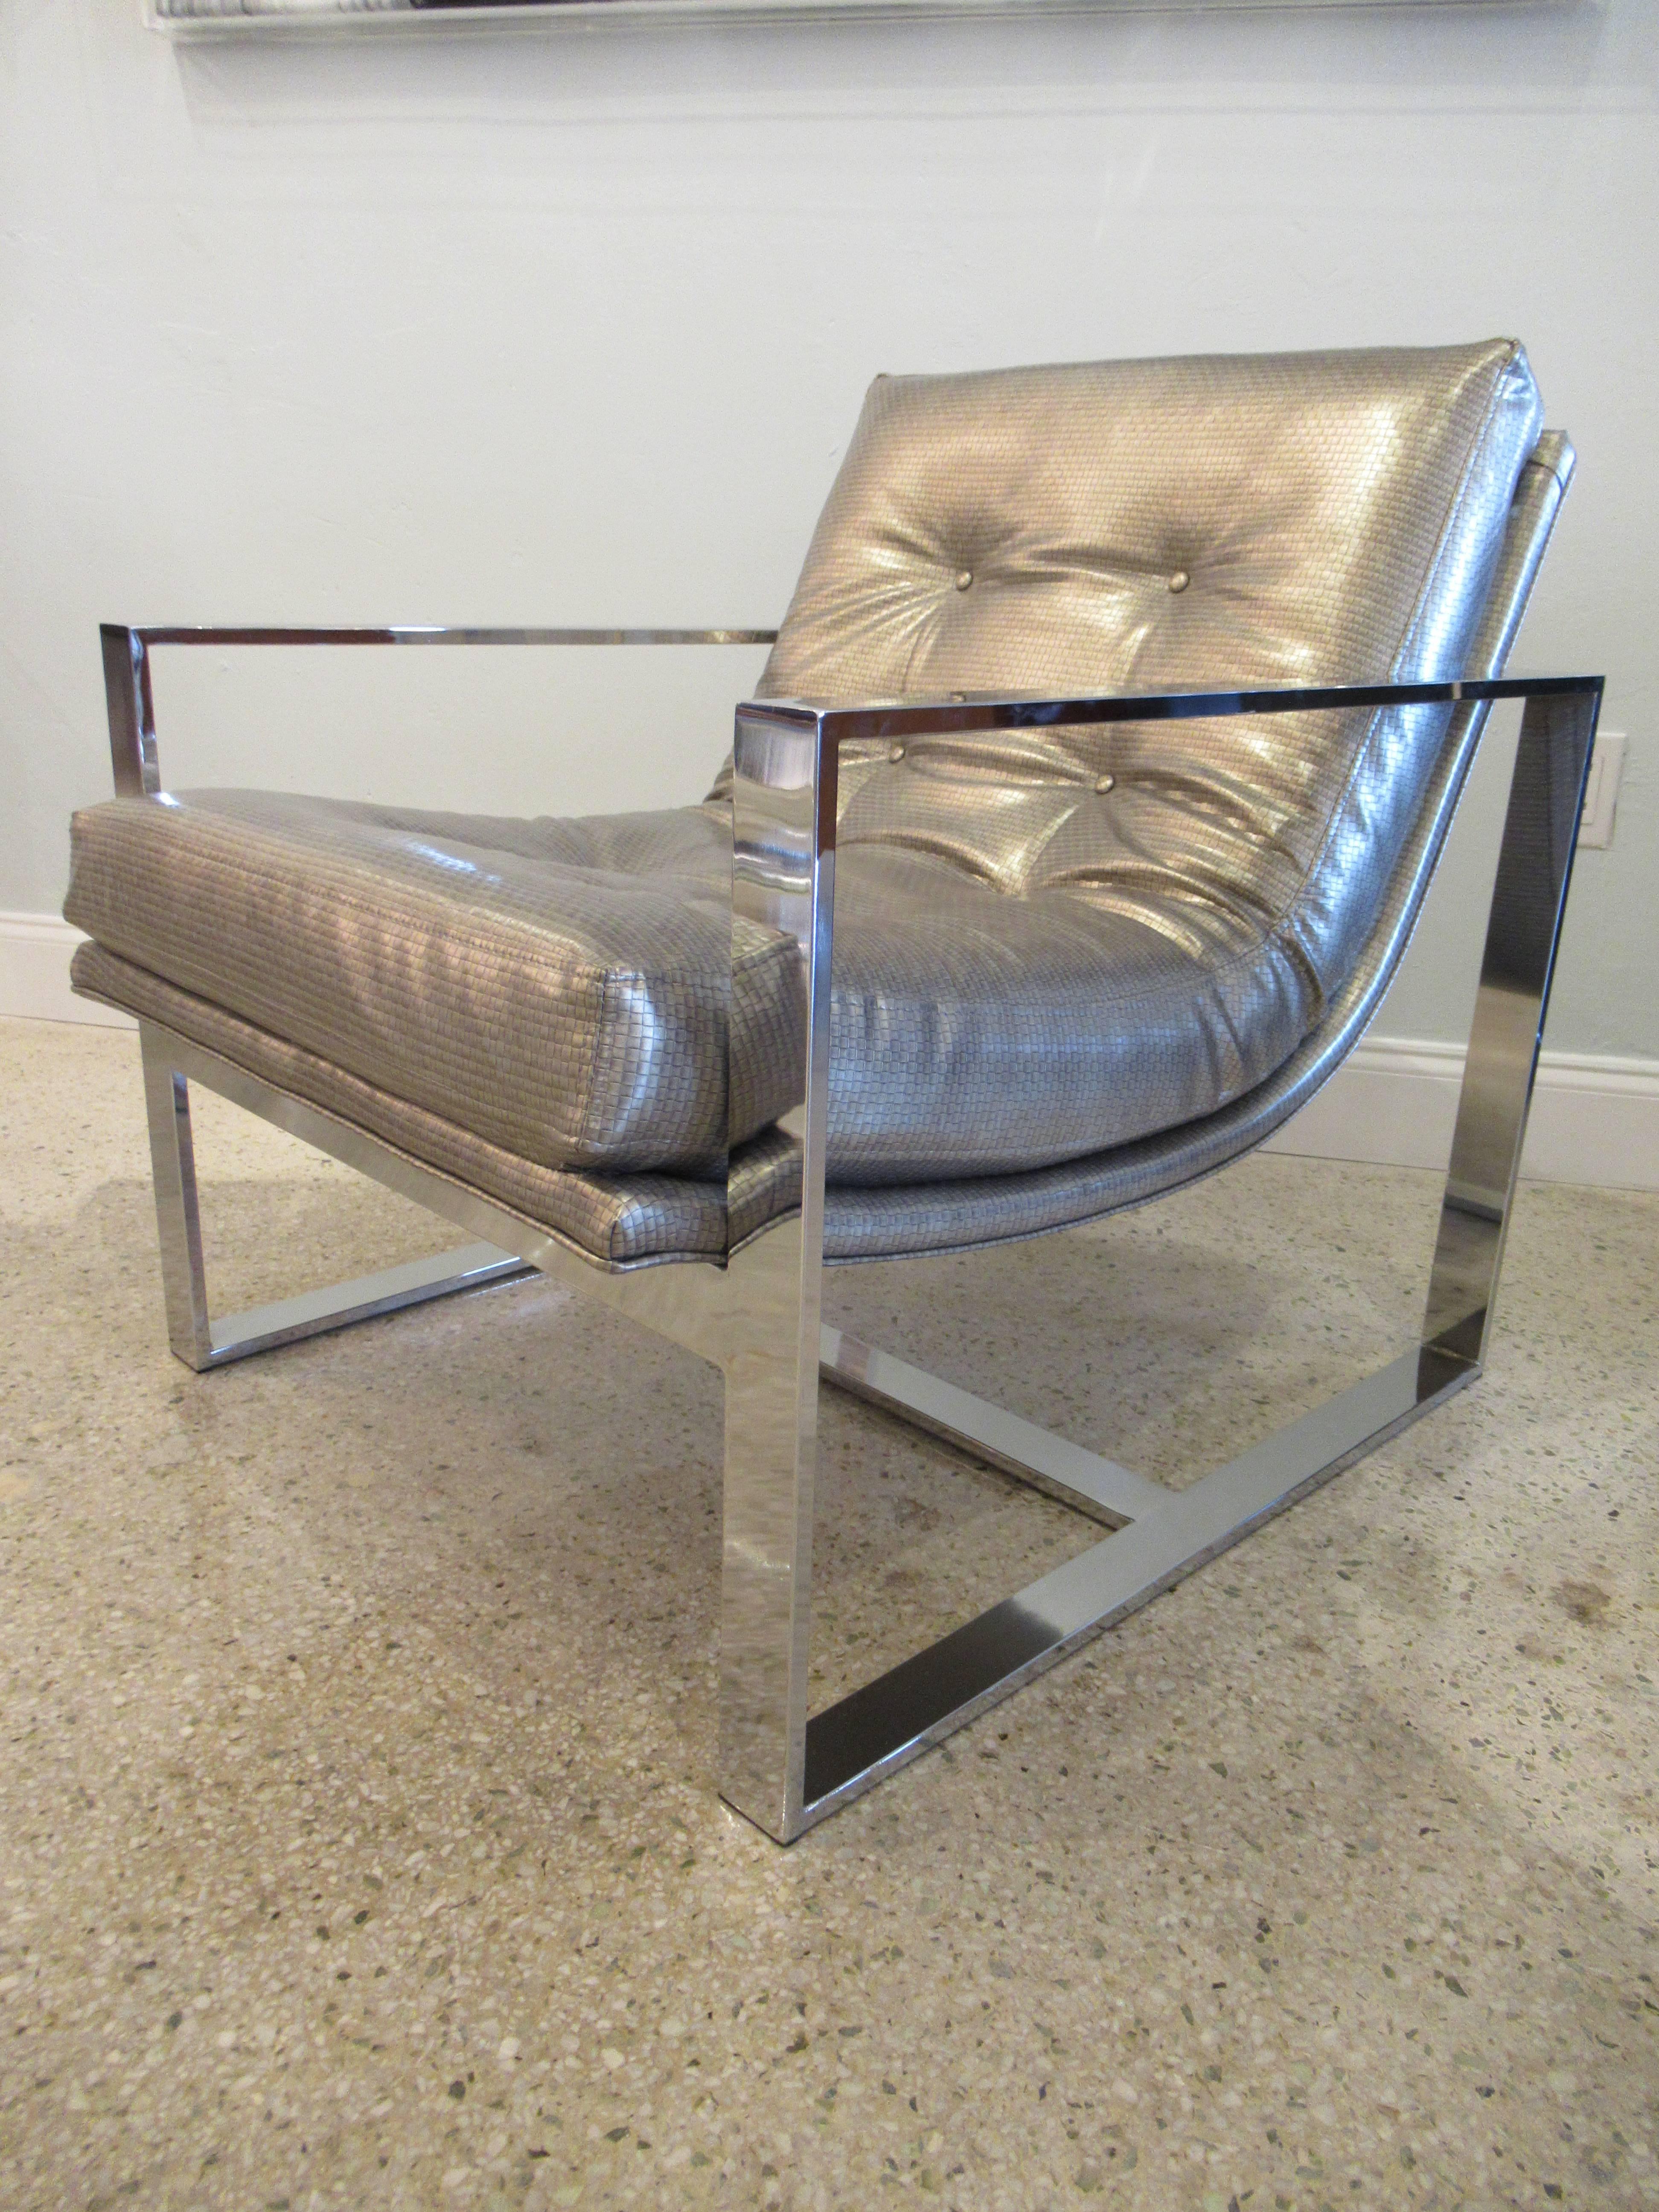 Late 20th Century American Modern Polished Chrome Sling Chair, 1970s For Sale